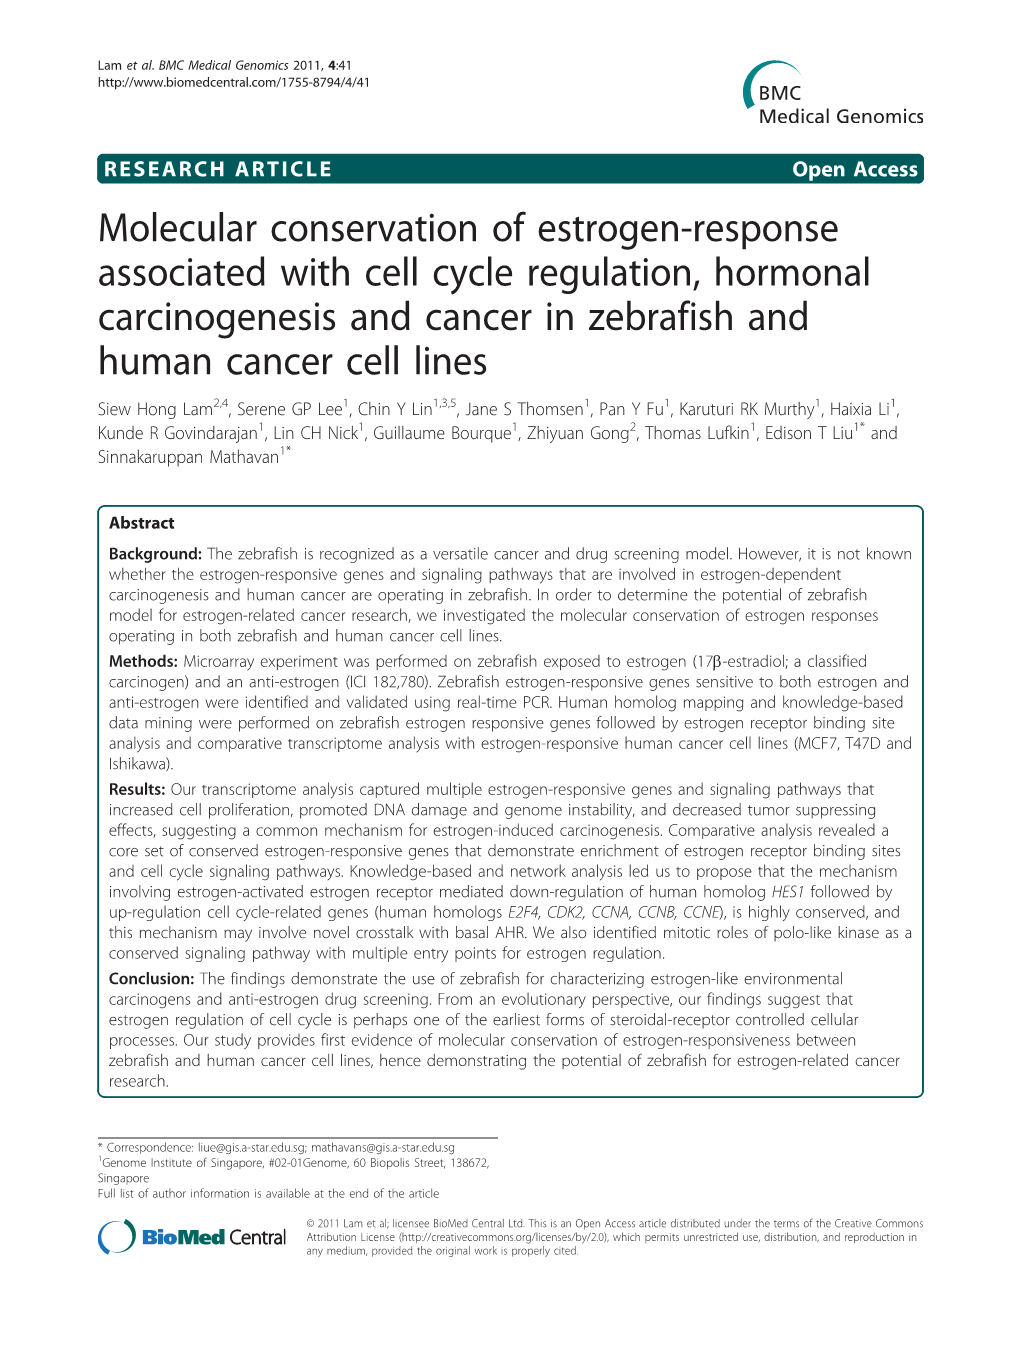 Molecular Conservation of Estrogen-Response Associated with Cell Cycle Regulation, Hormonal Carcinogenesis and Cancer in Zebrafi